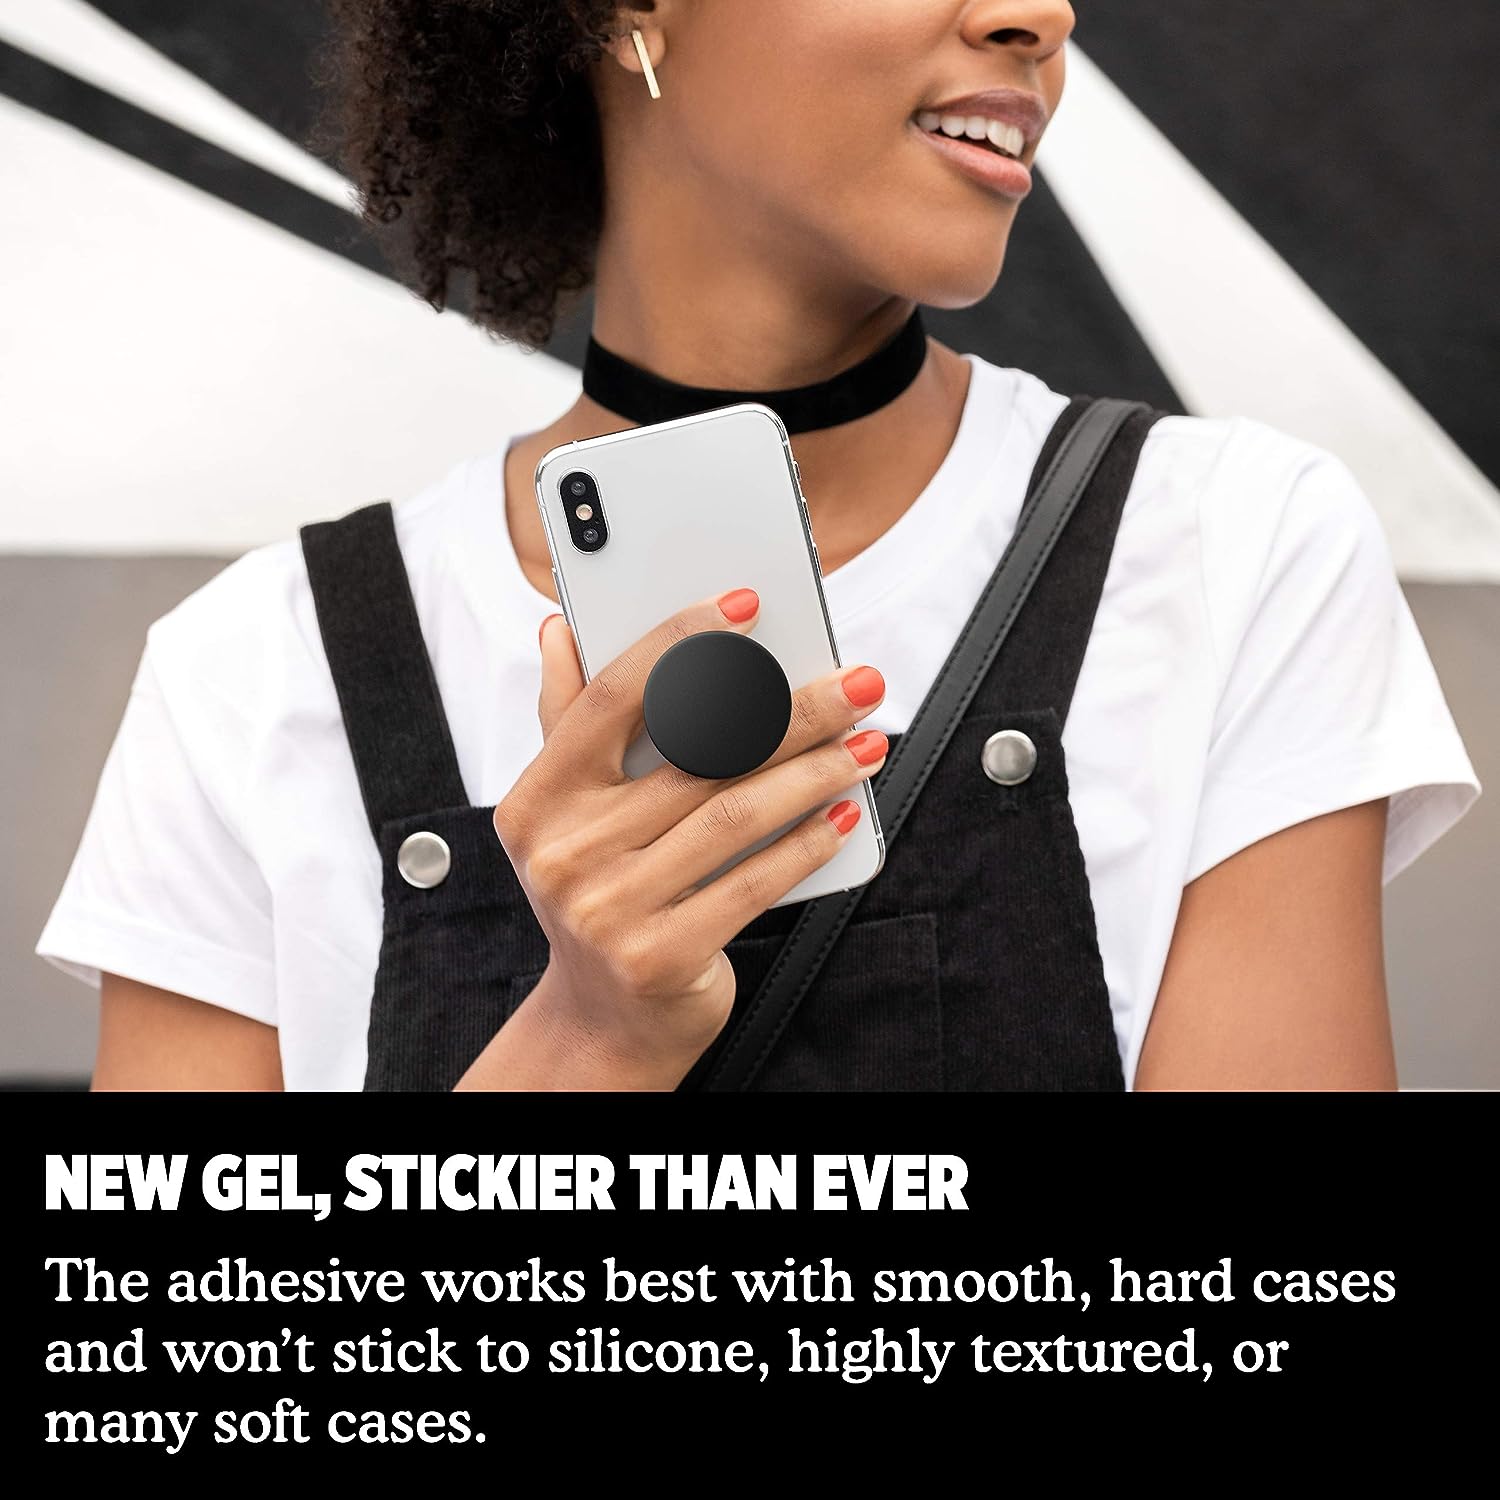 PopSockets Adhesive Phone Grip with Expandable Kickstand and swappable top - PopGrip Black - image 5 of 5